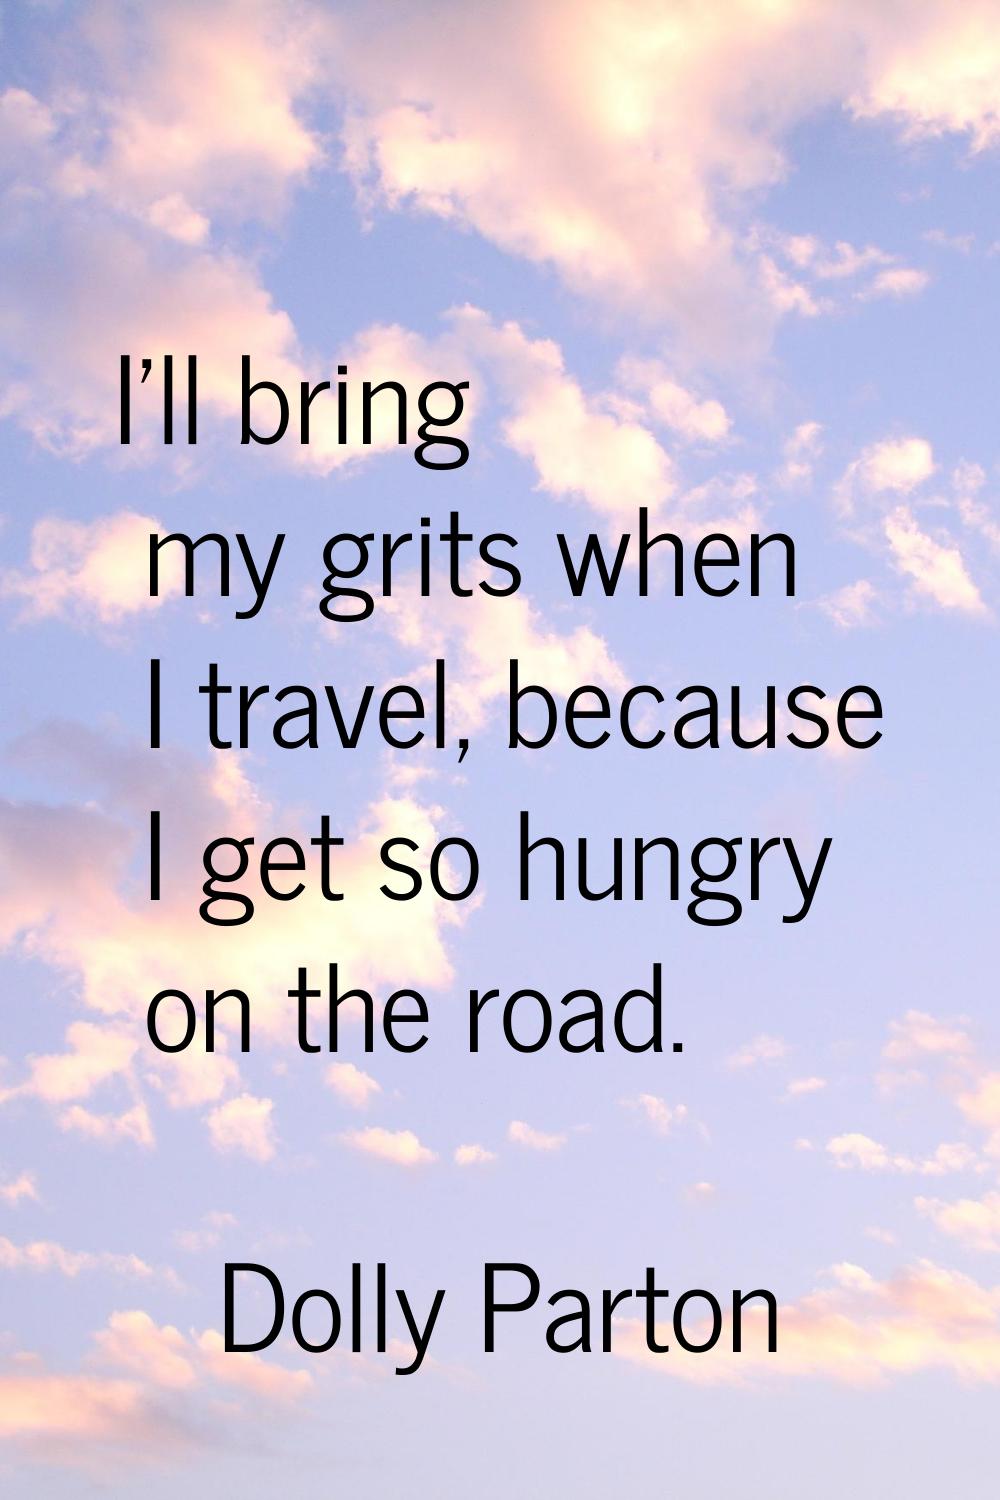 I'll bring my grits when I travel, because I get so hungry on the road.